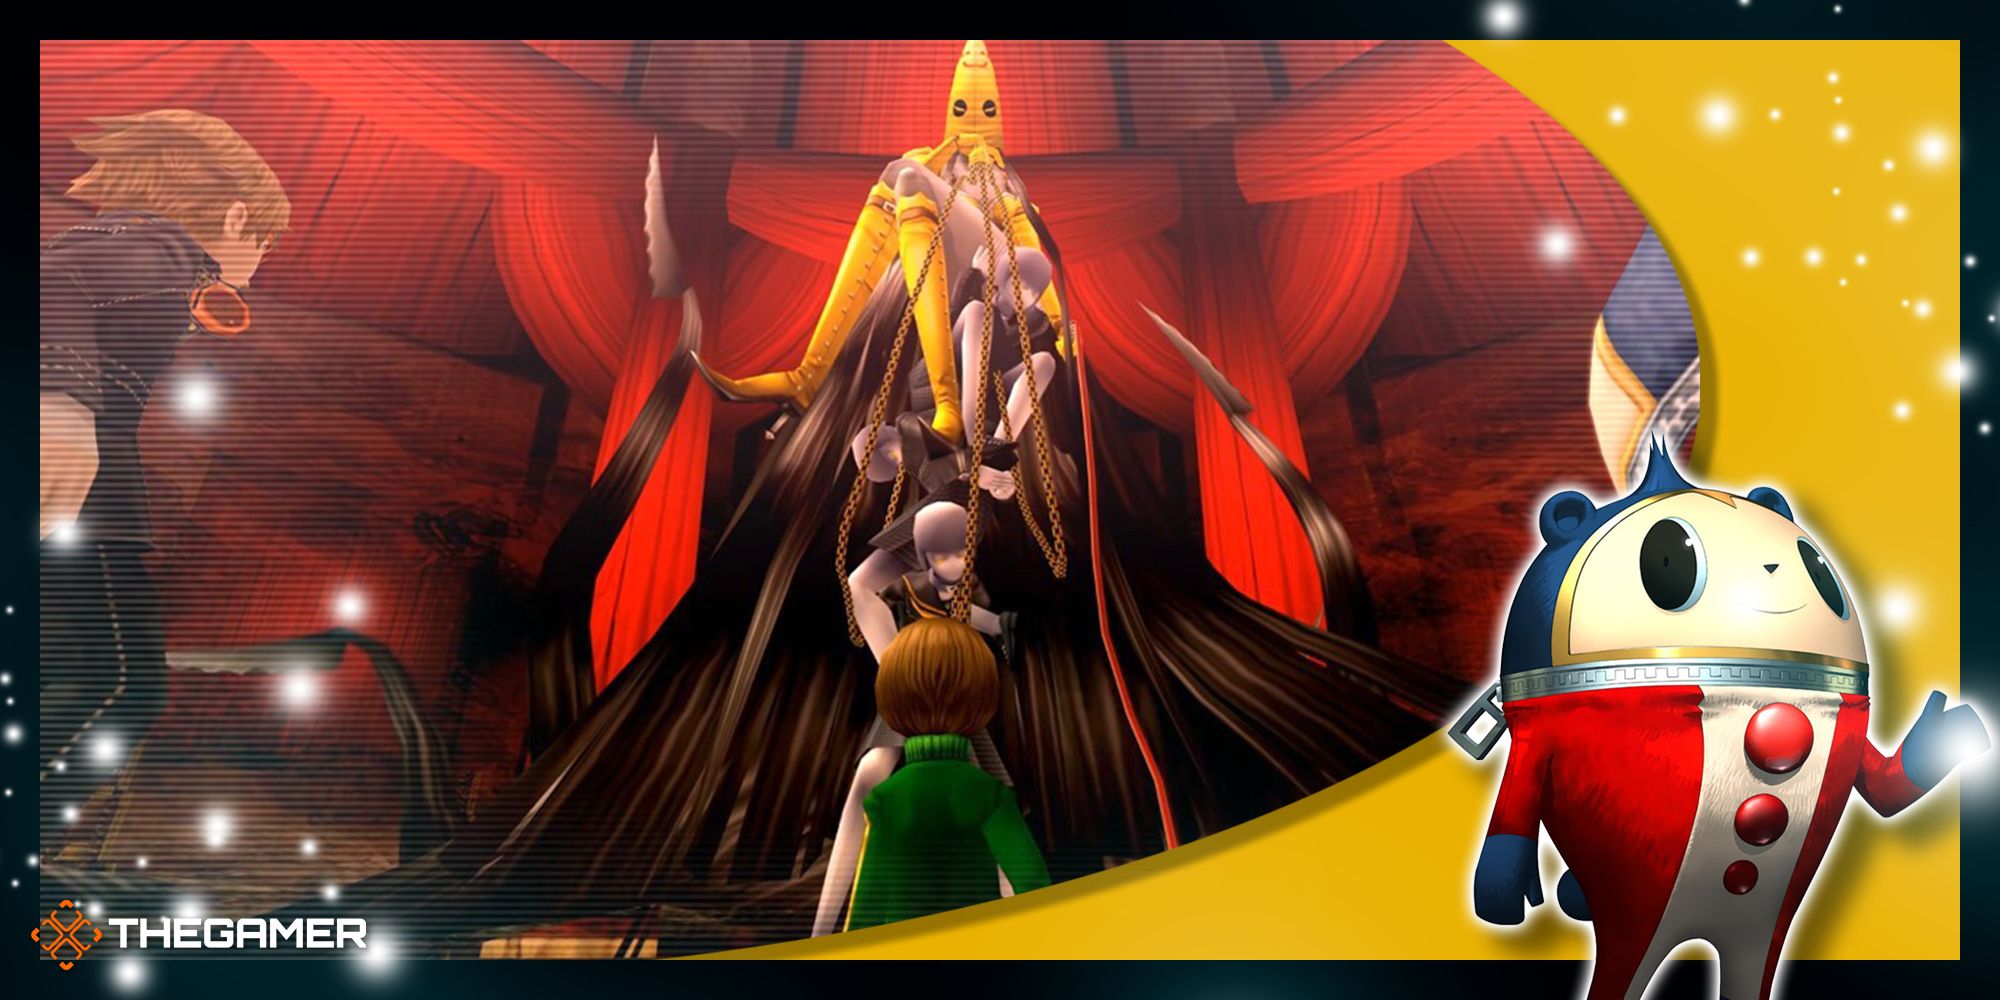 Persona 4 Golden - the team confronting shadow Chie in battle.